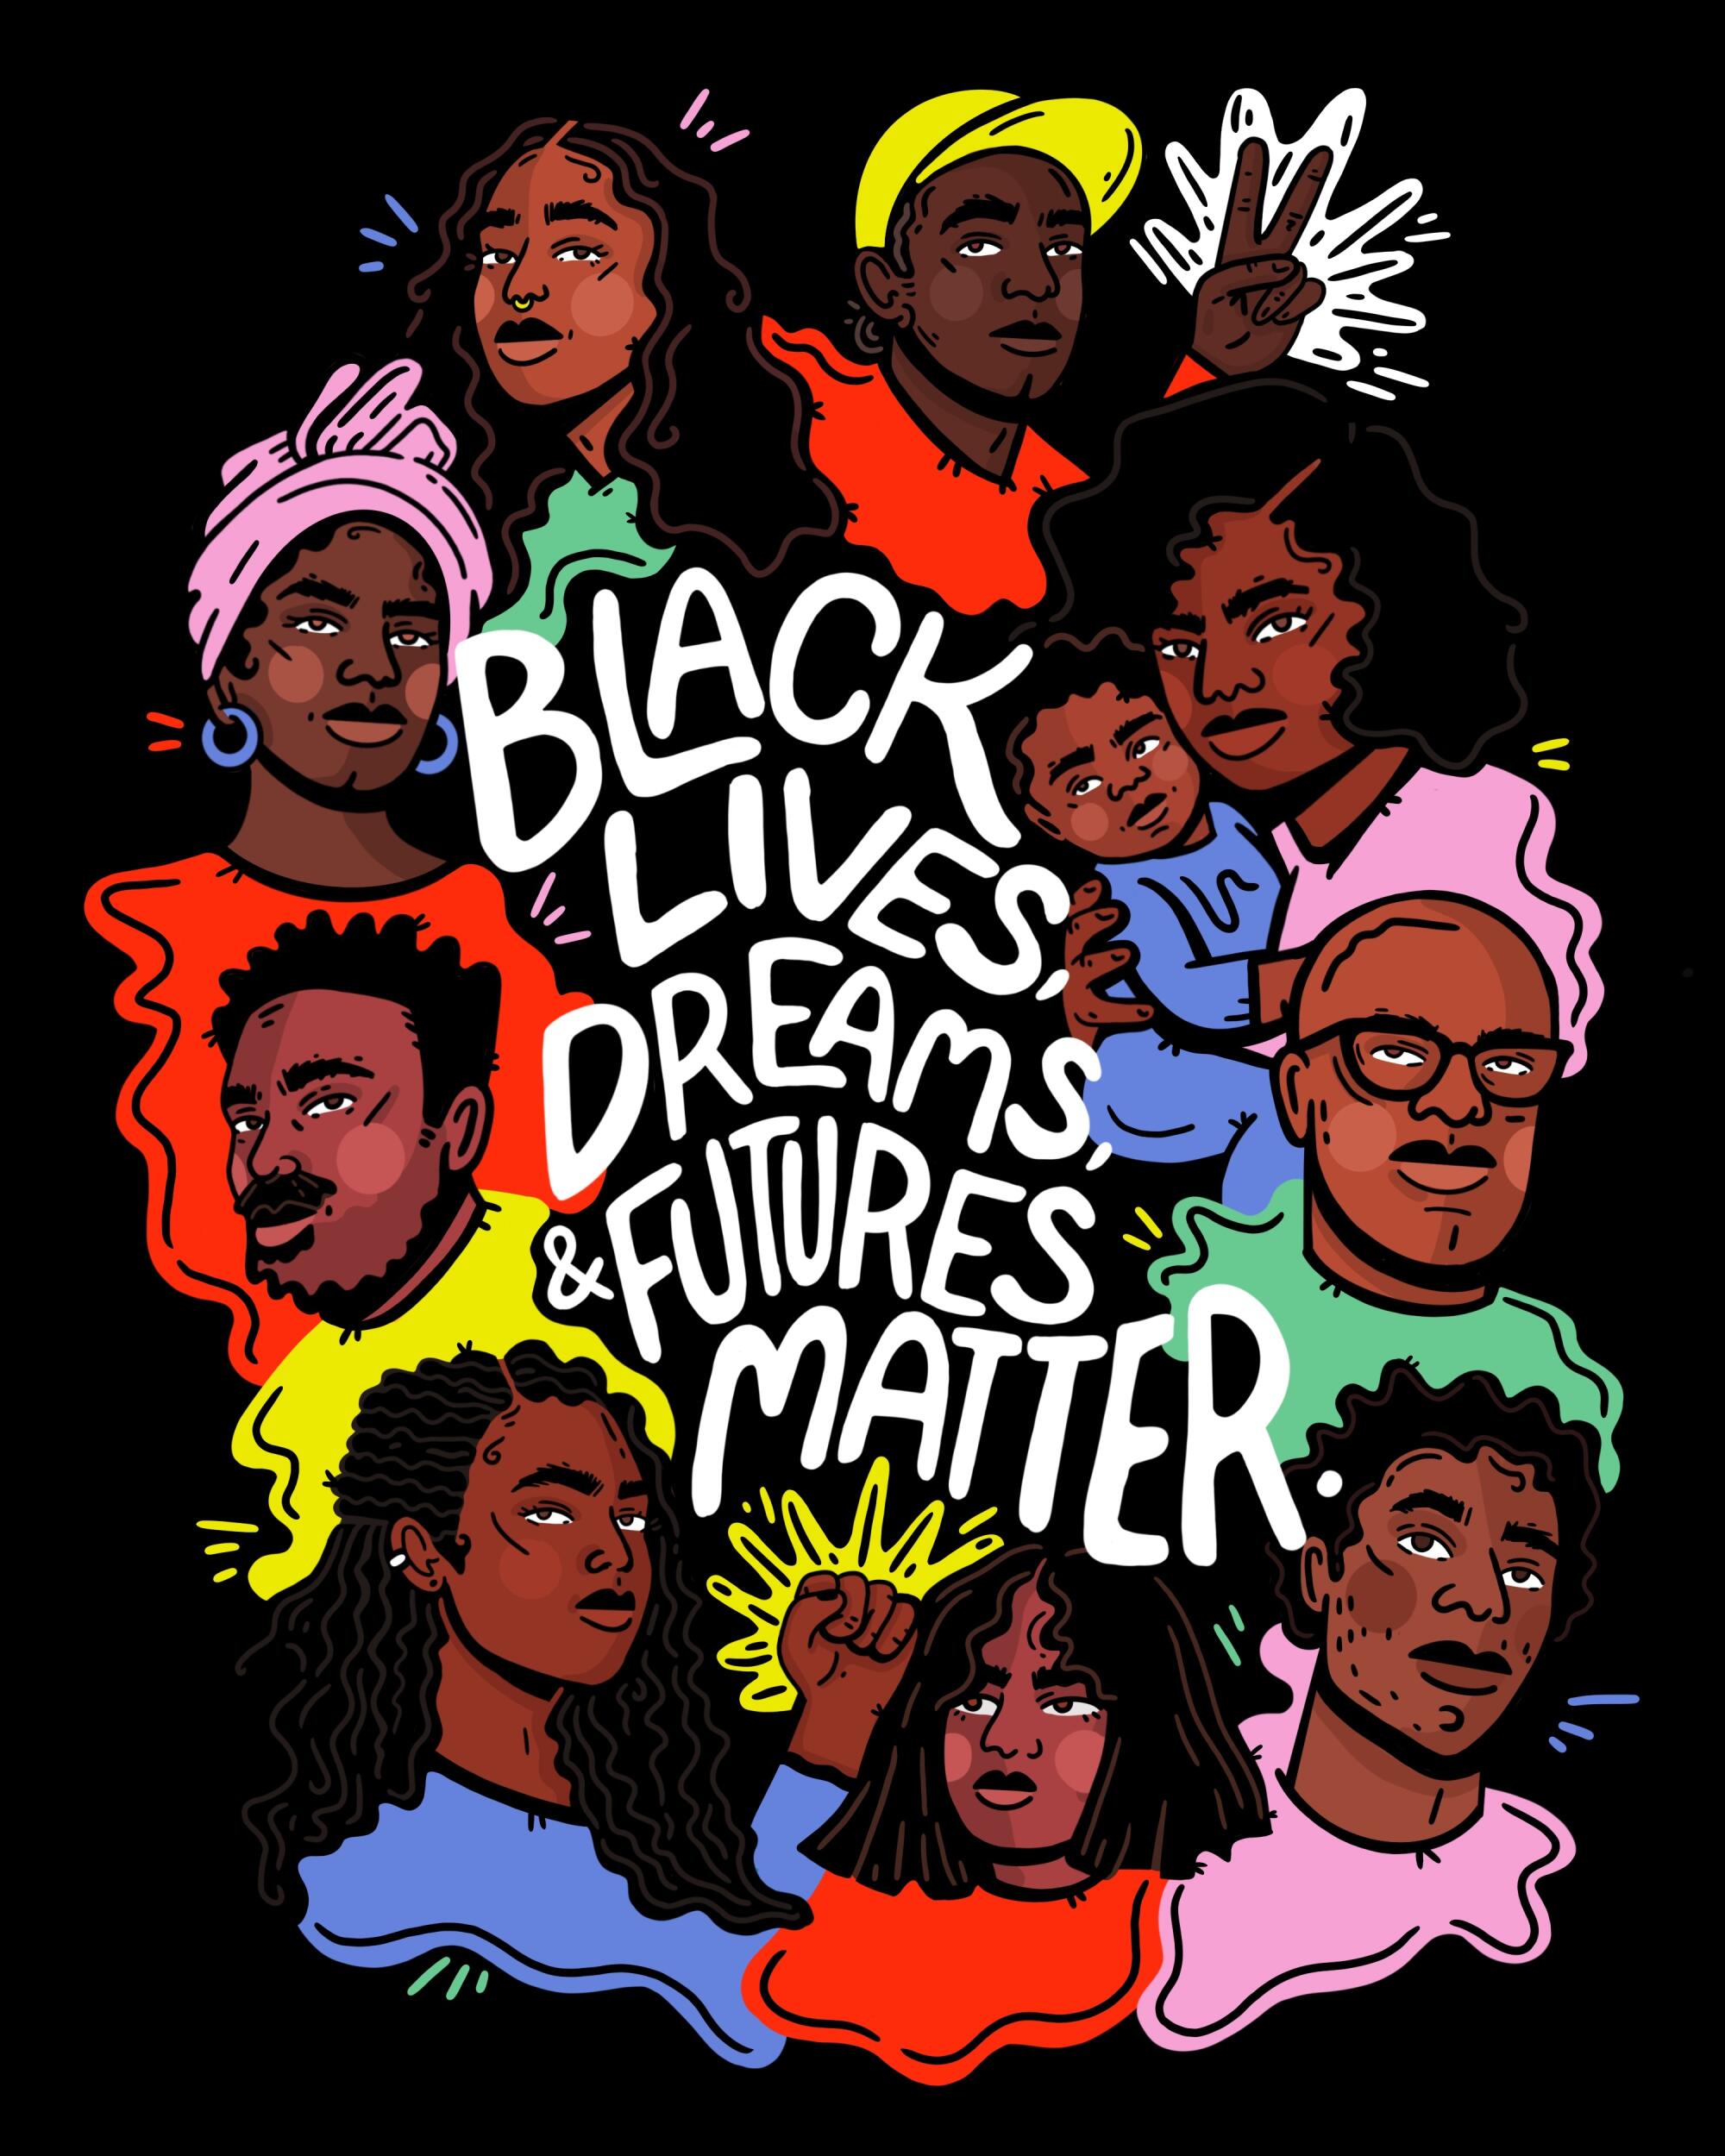 Artist illustration inspired by the Black Lives Matter movement, George Floyd's murder and protests